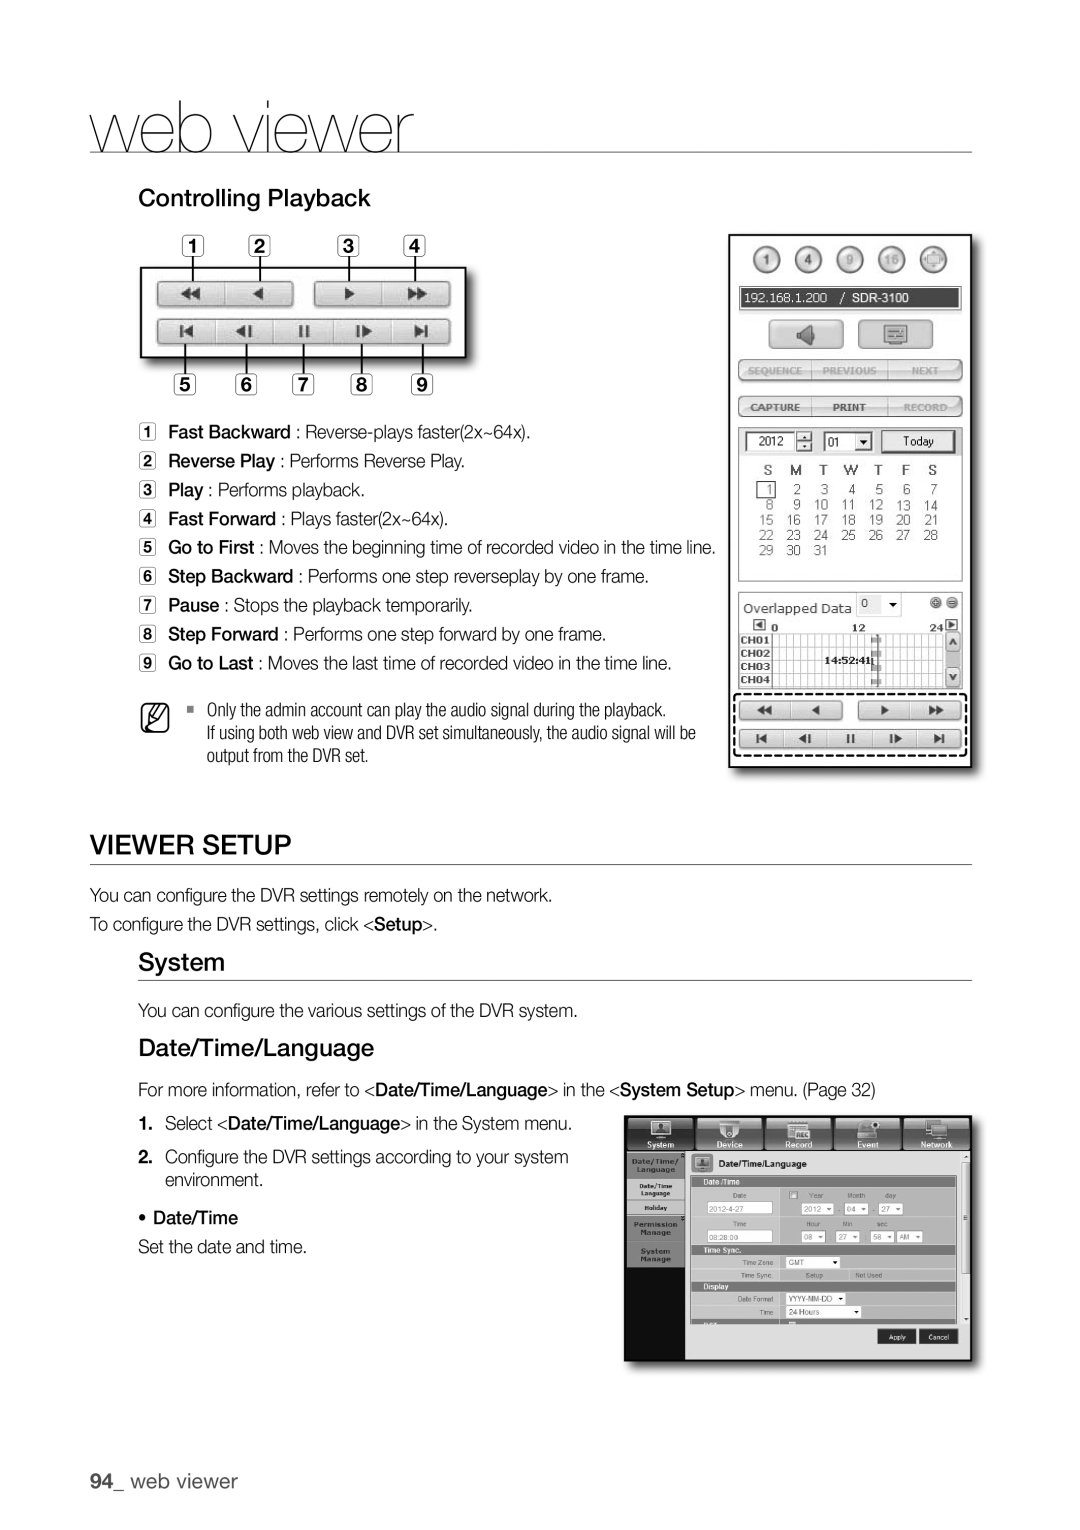 Samsung SDR3100 user manual VIeWer SetuP, System, controlling Playback a b c d e f g h, date/time/language, 94_ web viewer 